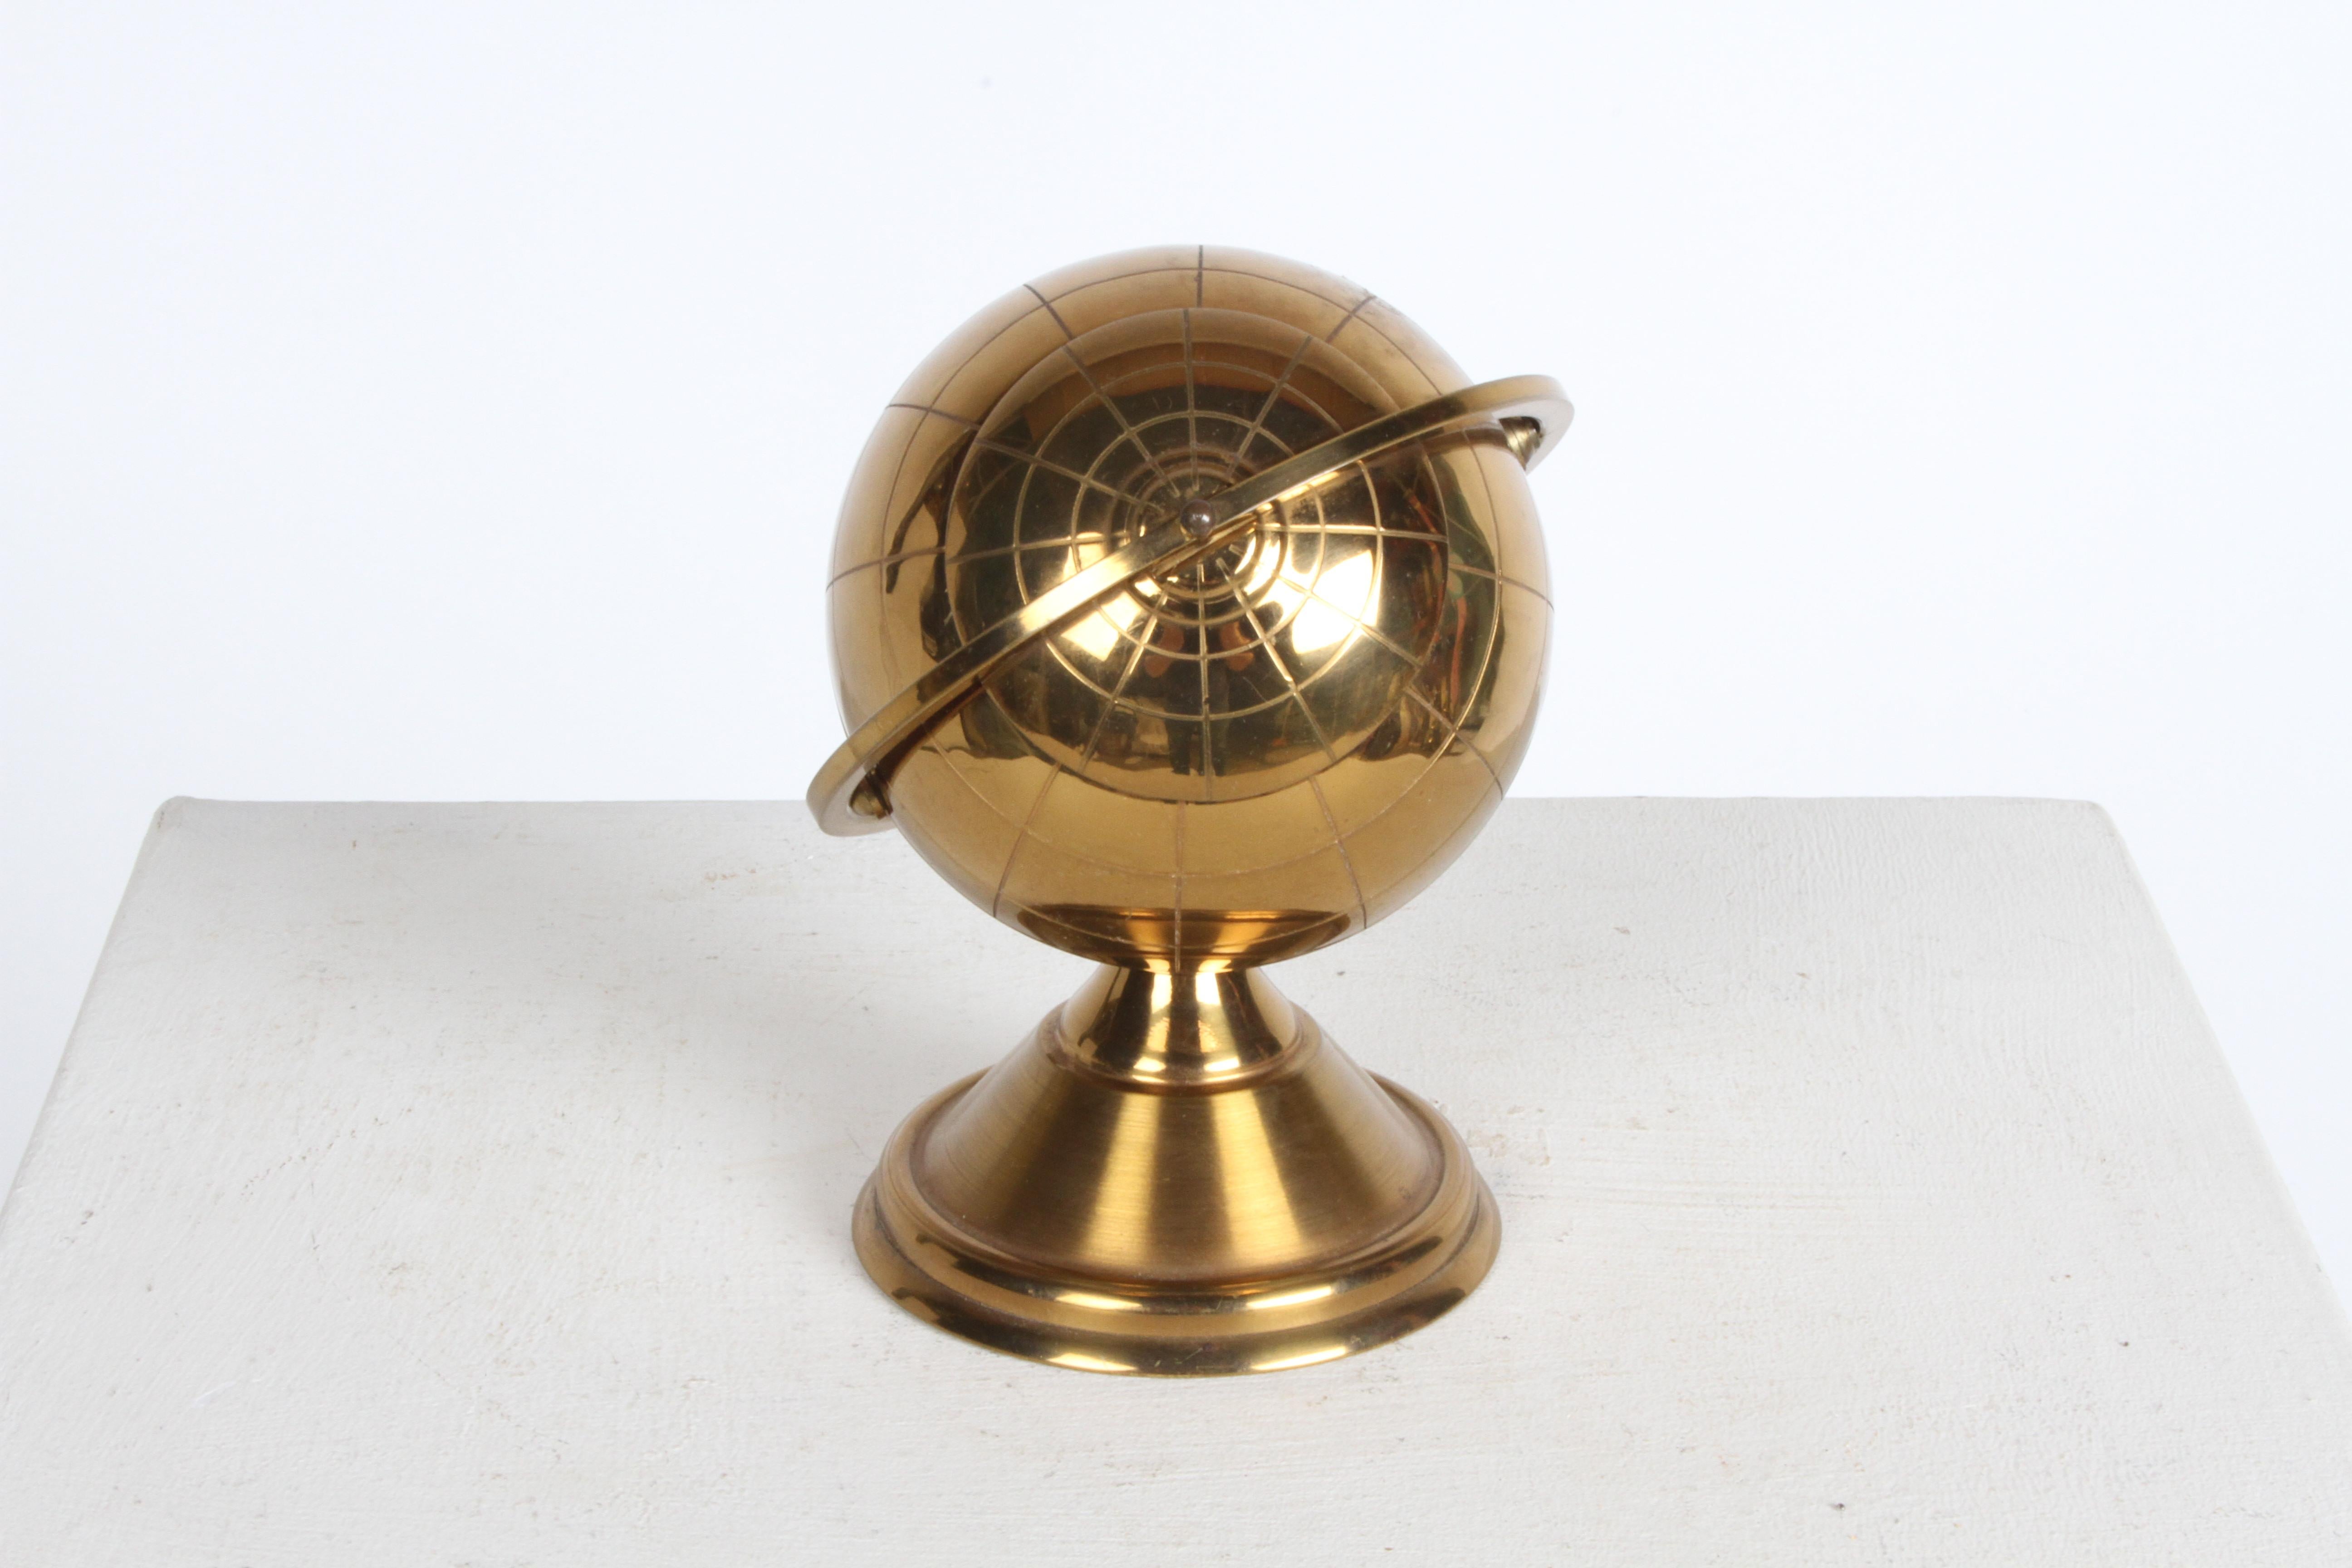 Mid-century Modern Sputnik era, brass globe cigarette holder. The lid slides open on the globe's axis to reveal an interior enamel metal compartment designed to hold cigarettes or whatever. Nice clean bright brass, some wear to interior enamel. 

